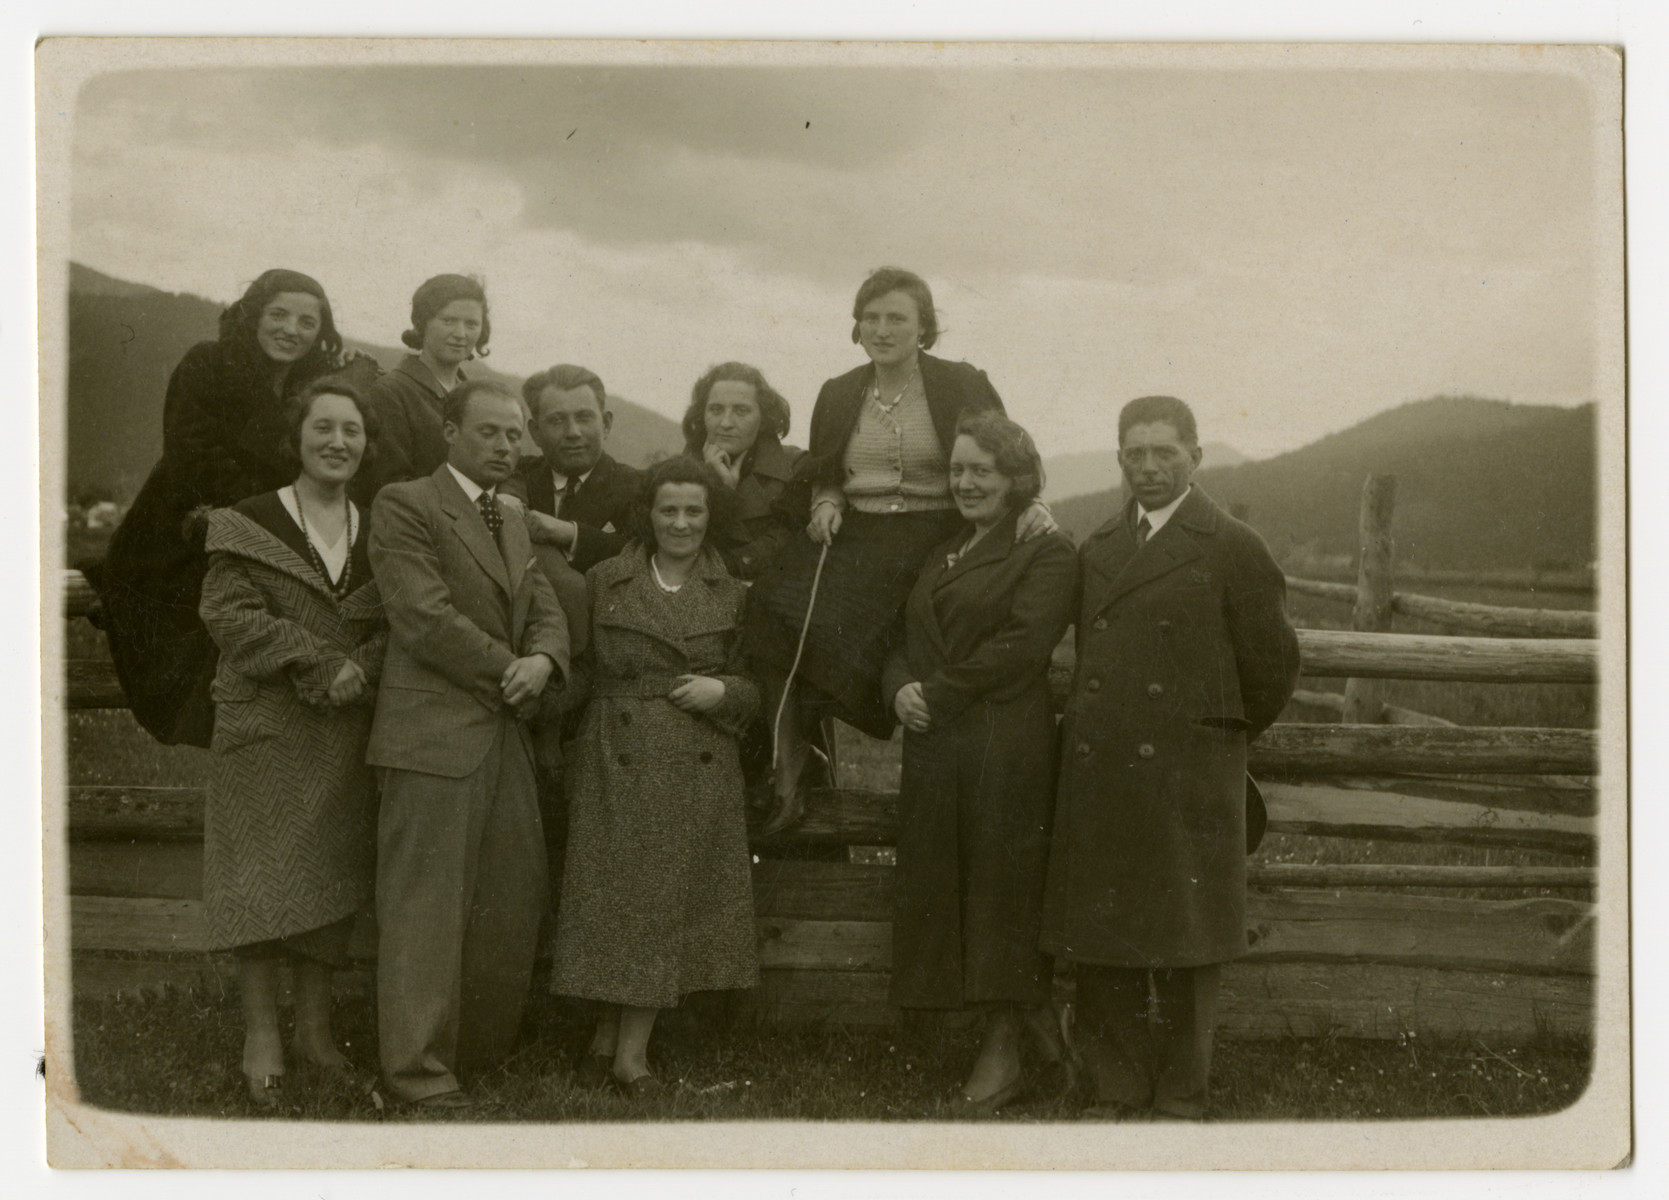 A group of Jewish family and friends stands in the Skole countryside by a fence.

Pictured standing in the first row, from left: Szajna Friedler, Beno Rozenberg, unidentified; Lotka Friedler and unidentified.  In the second row, from left: unidentified; Mania Rozenberg; Moshe Josefsberg; unidentified and Frieda Rozenberg Josefsberg.